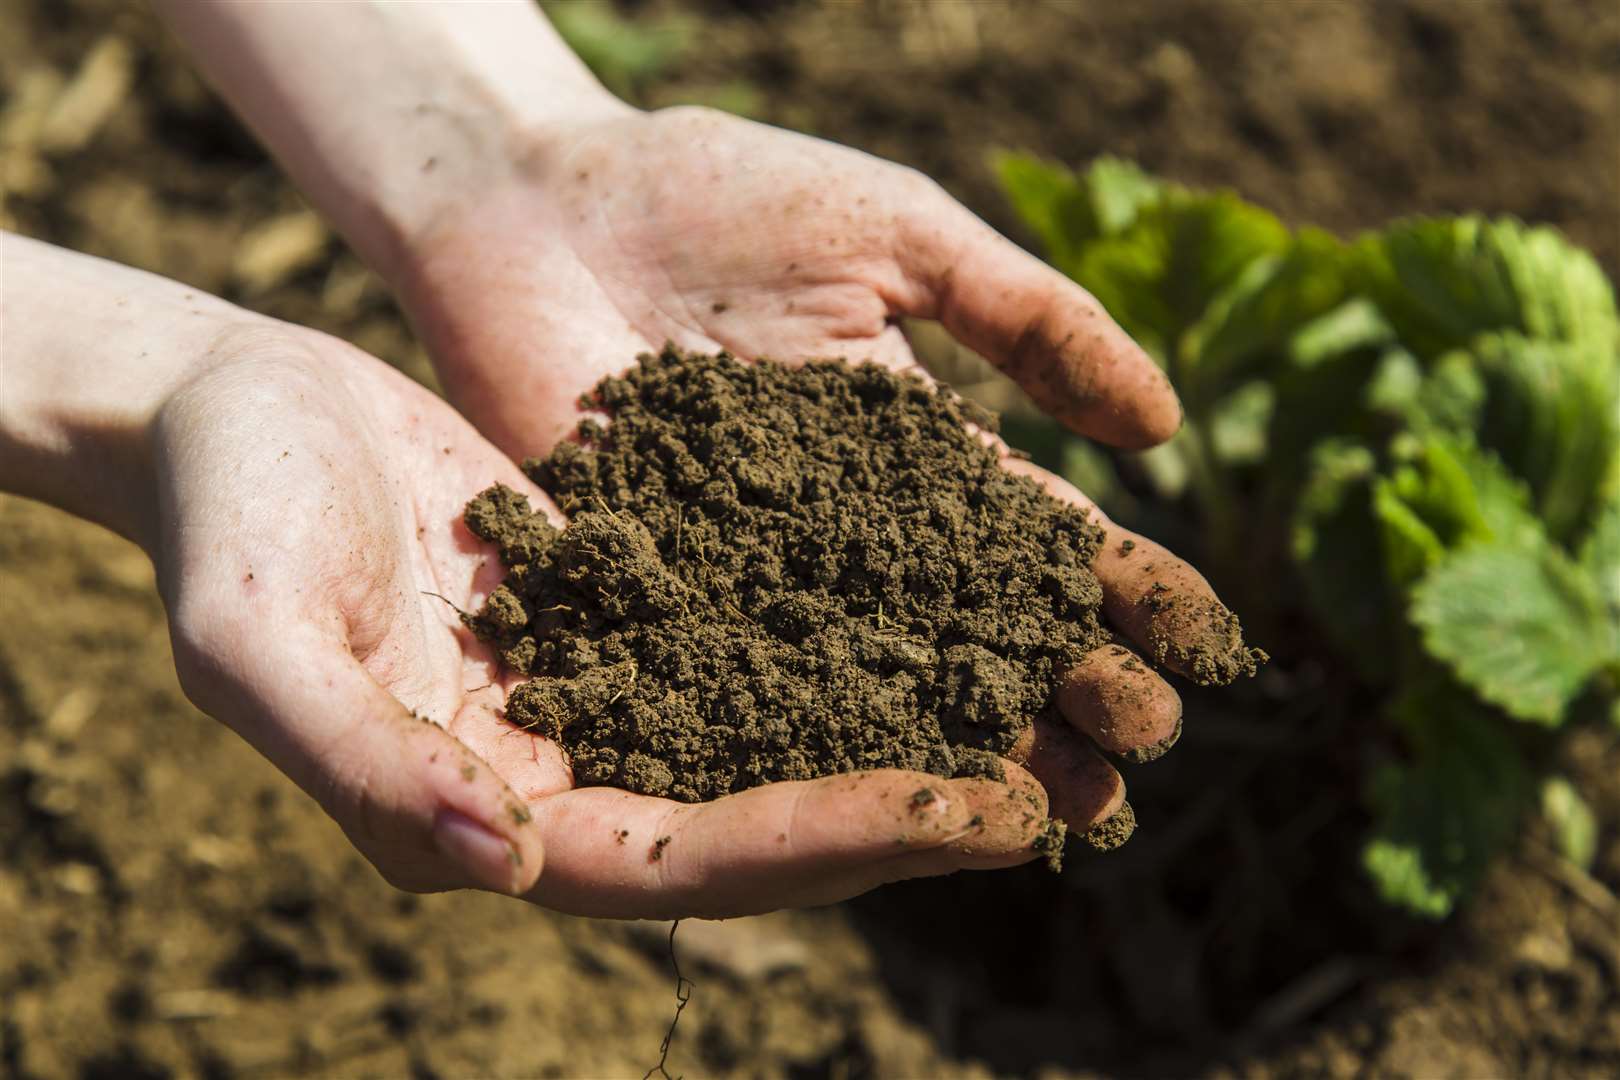 Get your hands dirty and test the condition of your soil.